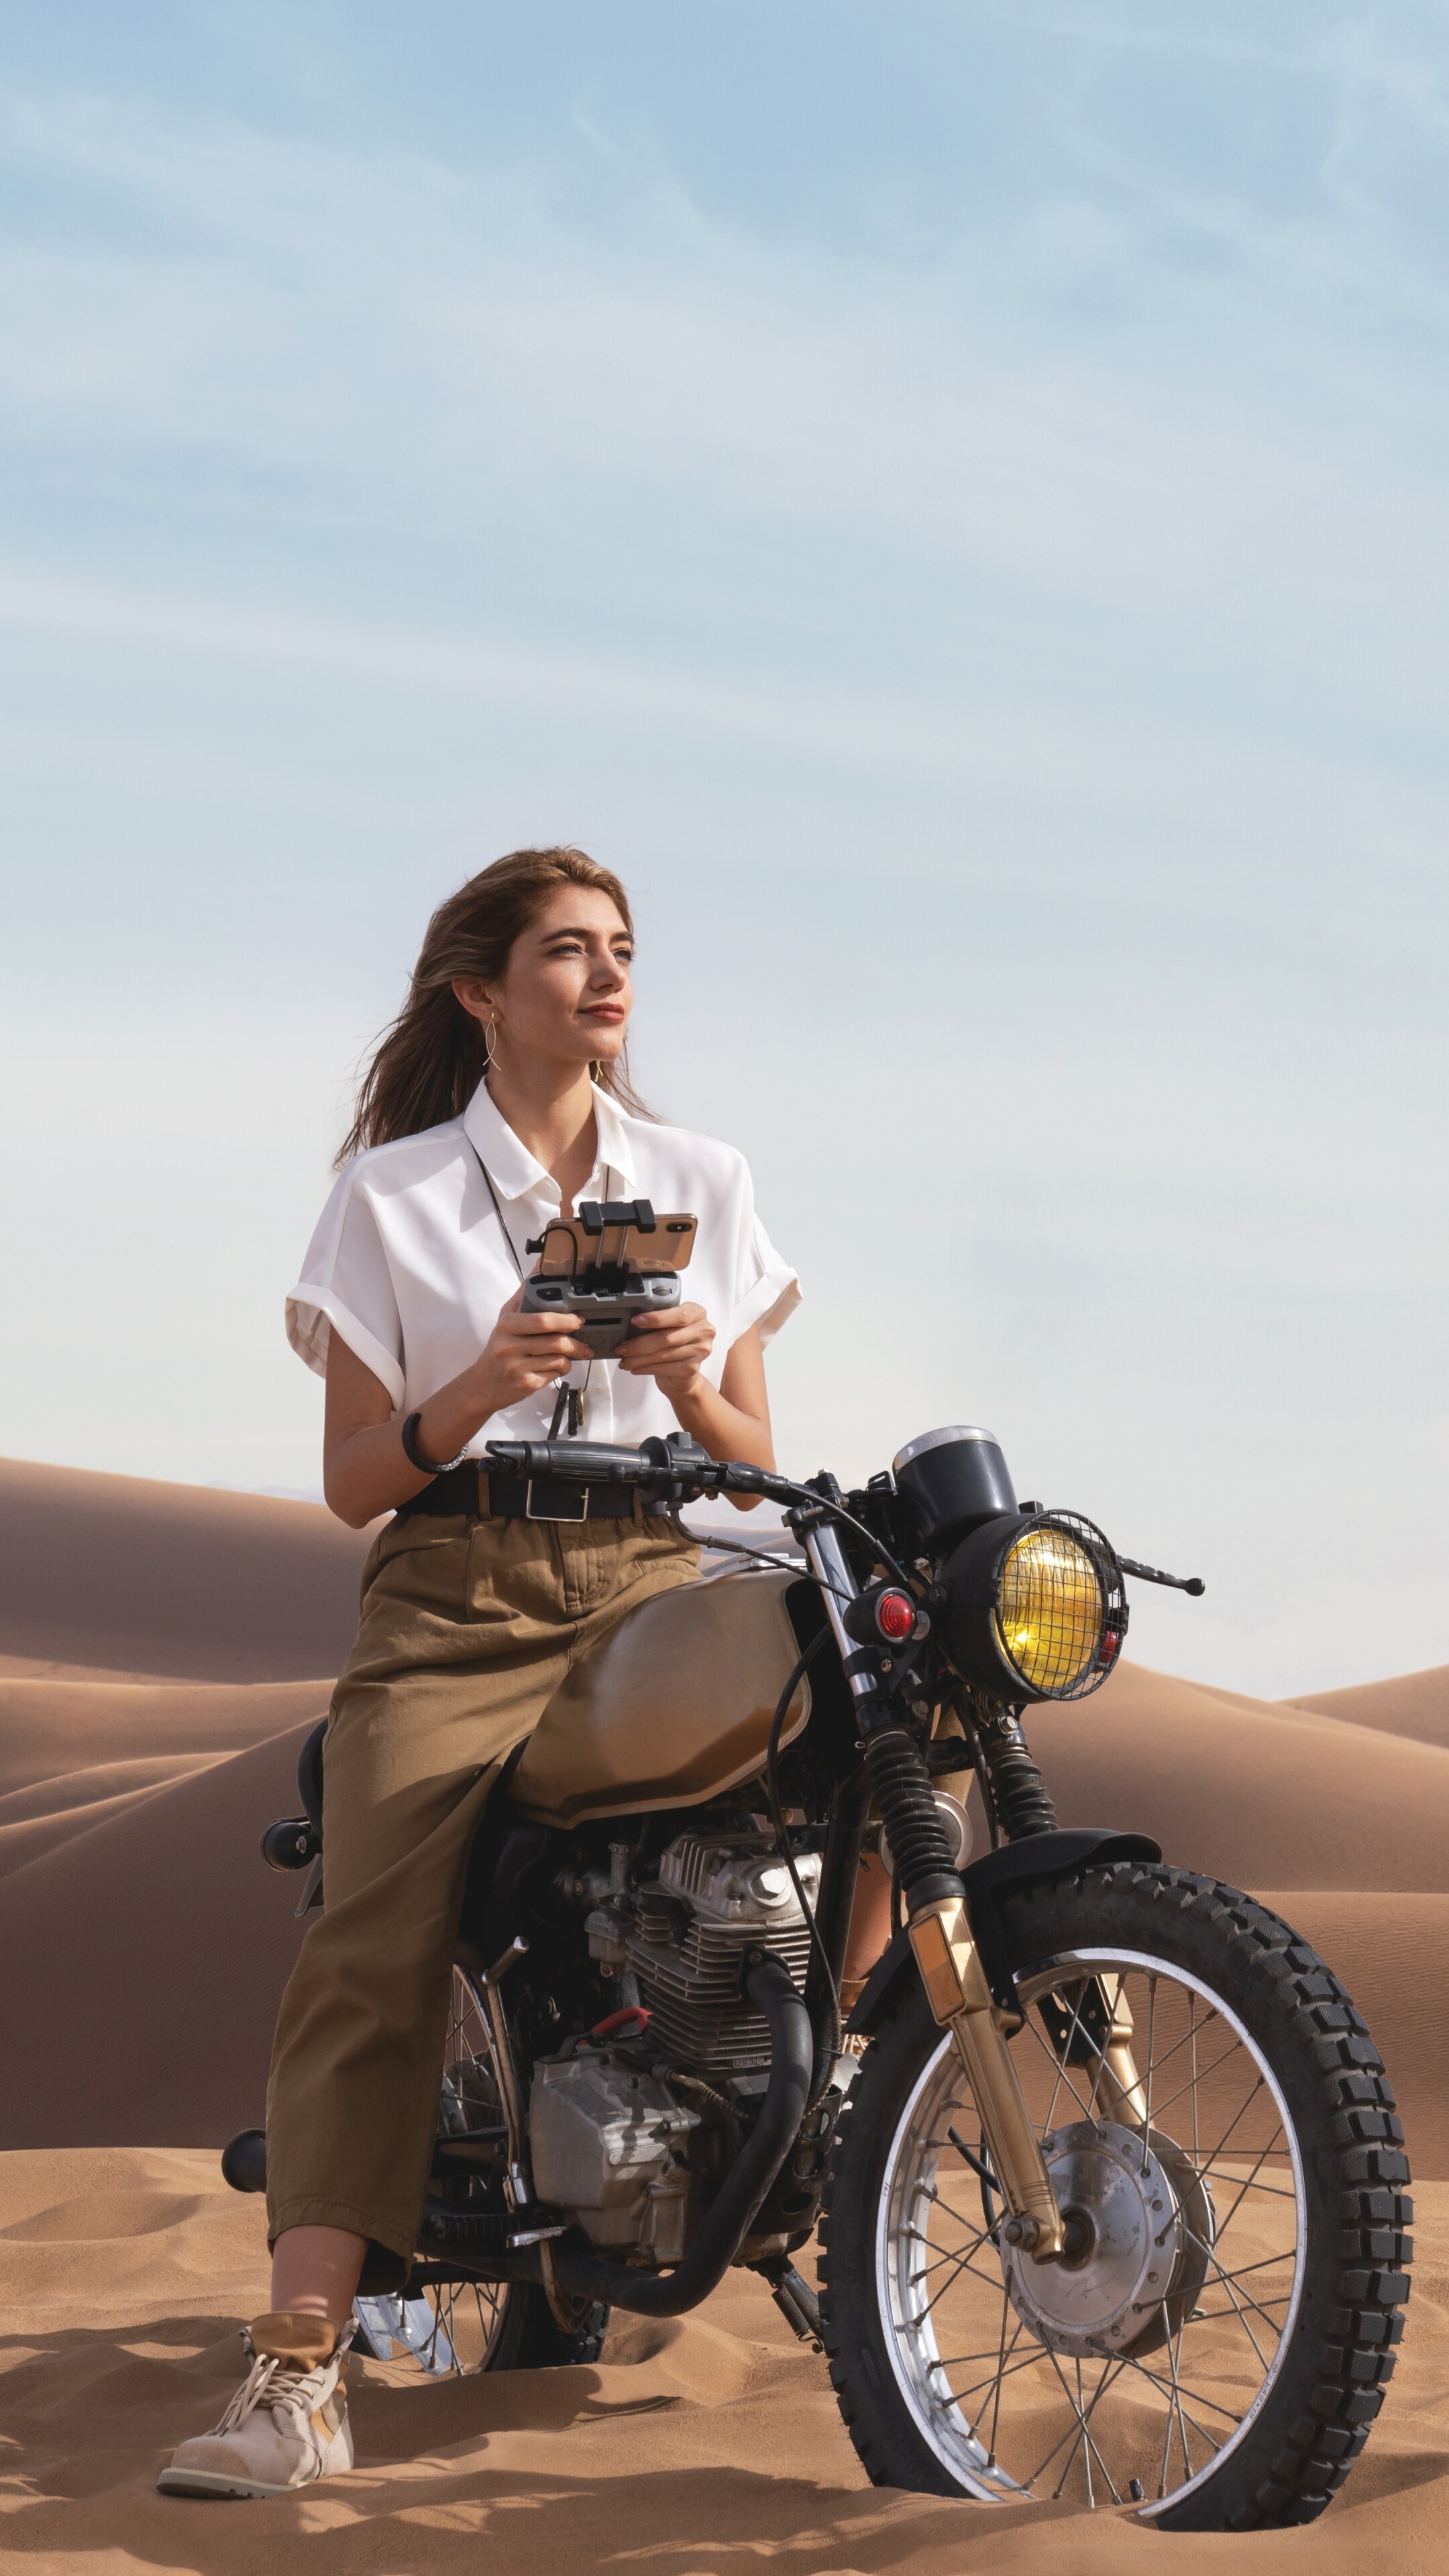 Girls and Motorcycles: Riding in sand dunes, Hot weather riding, Lightweight motorcycles, Female motorcyclist. 2160x3840 4K Wallpaper.